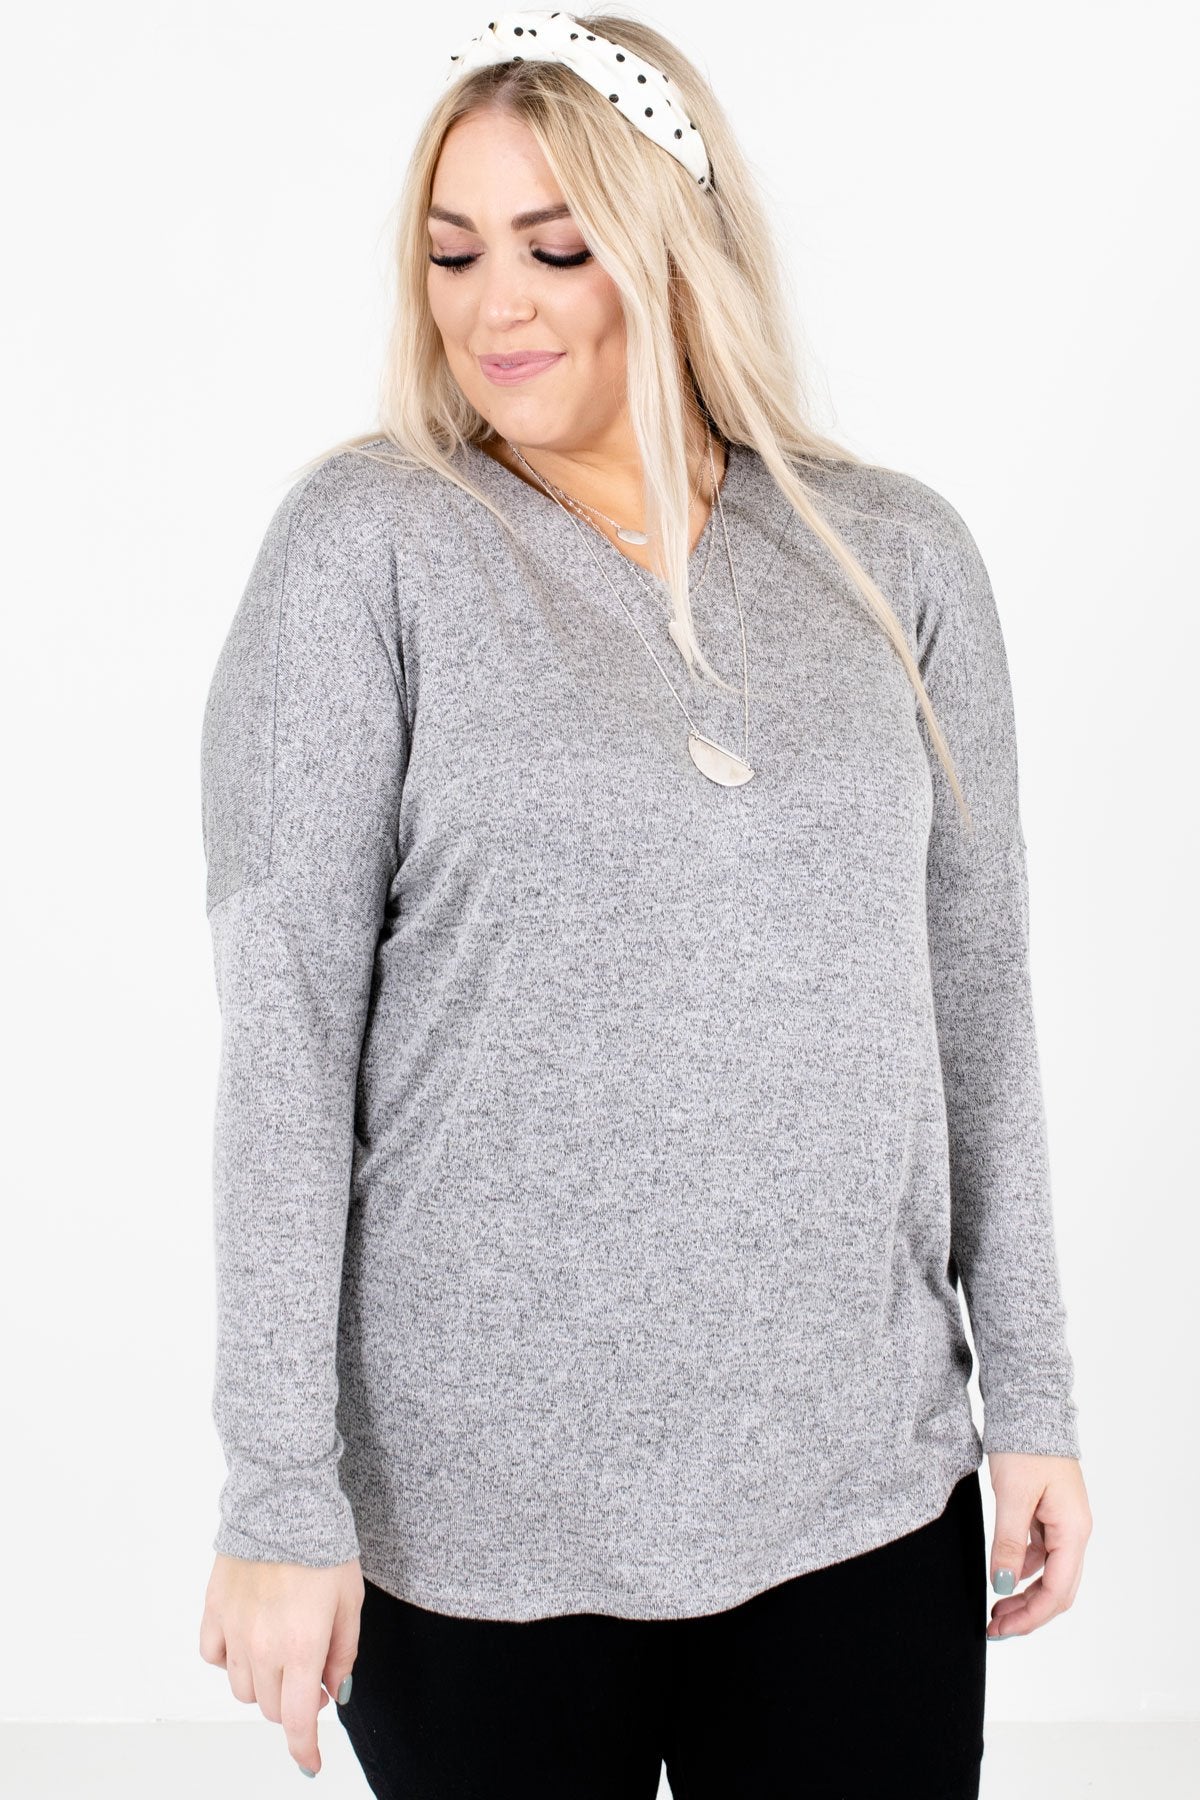 Women’s Heather Gray Soft High-Quality Boutique Tops